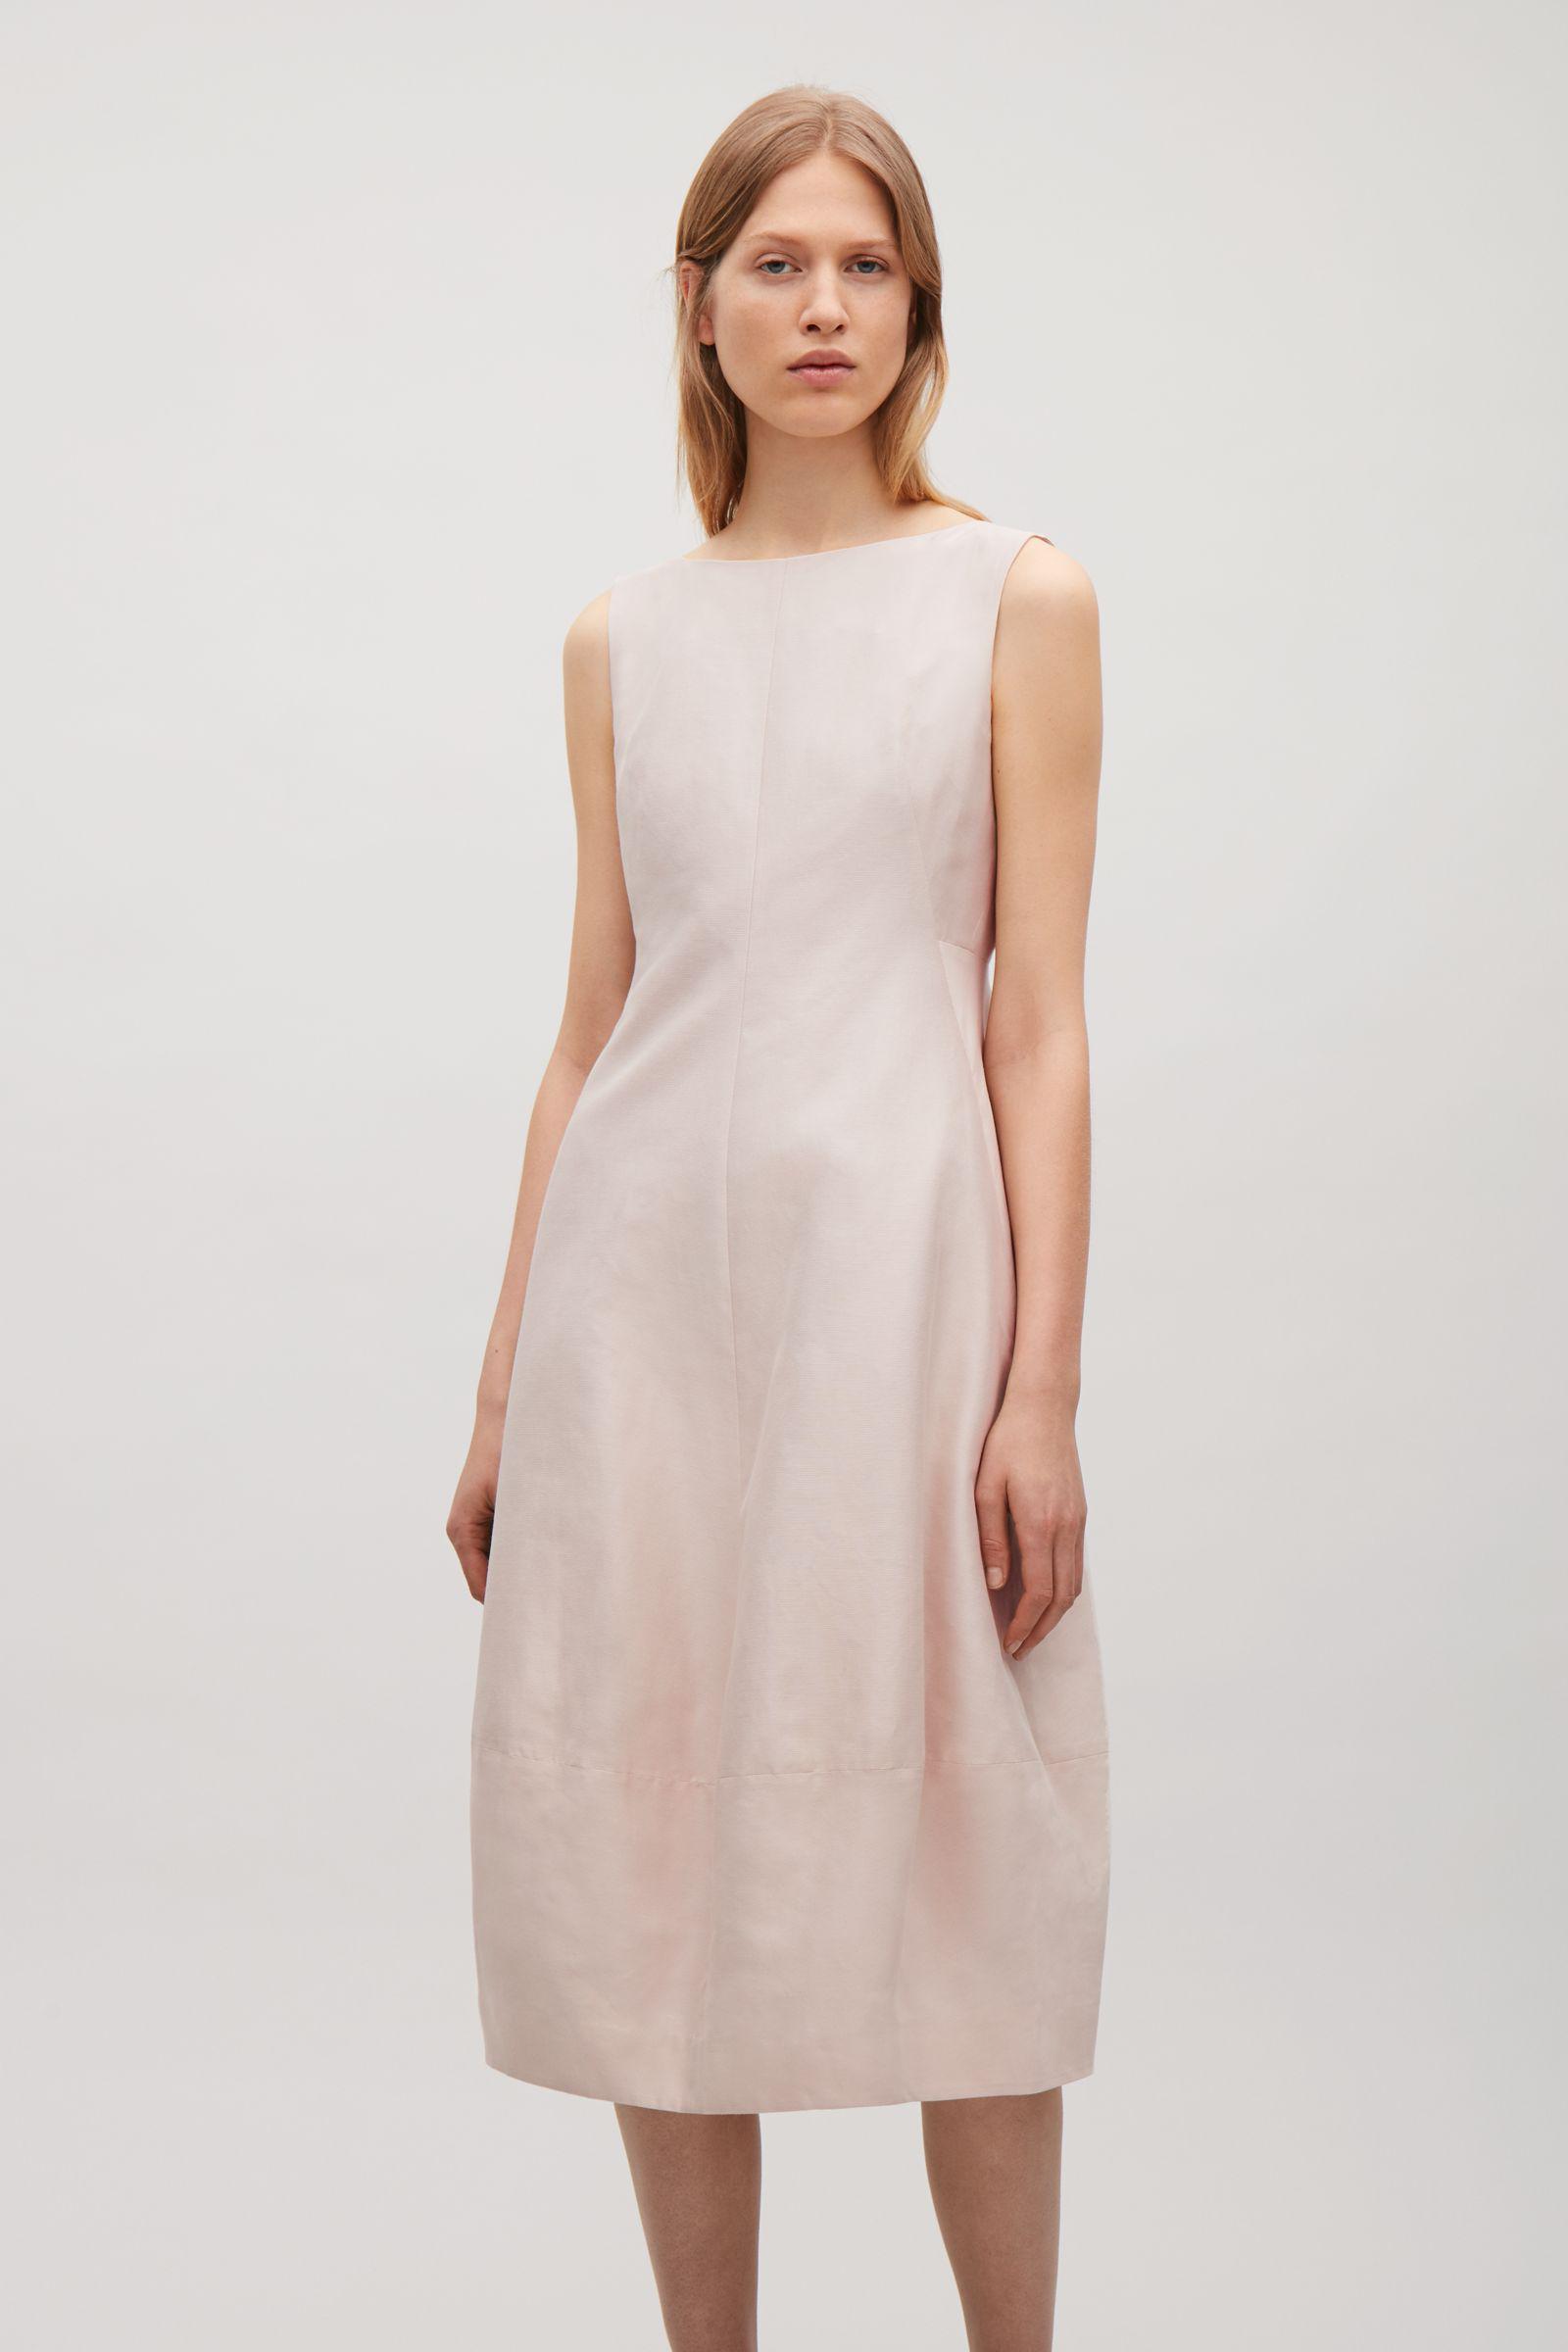 COS Silk Sleeveless Dress With Cocoon Skirt - Lyst